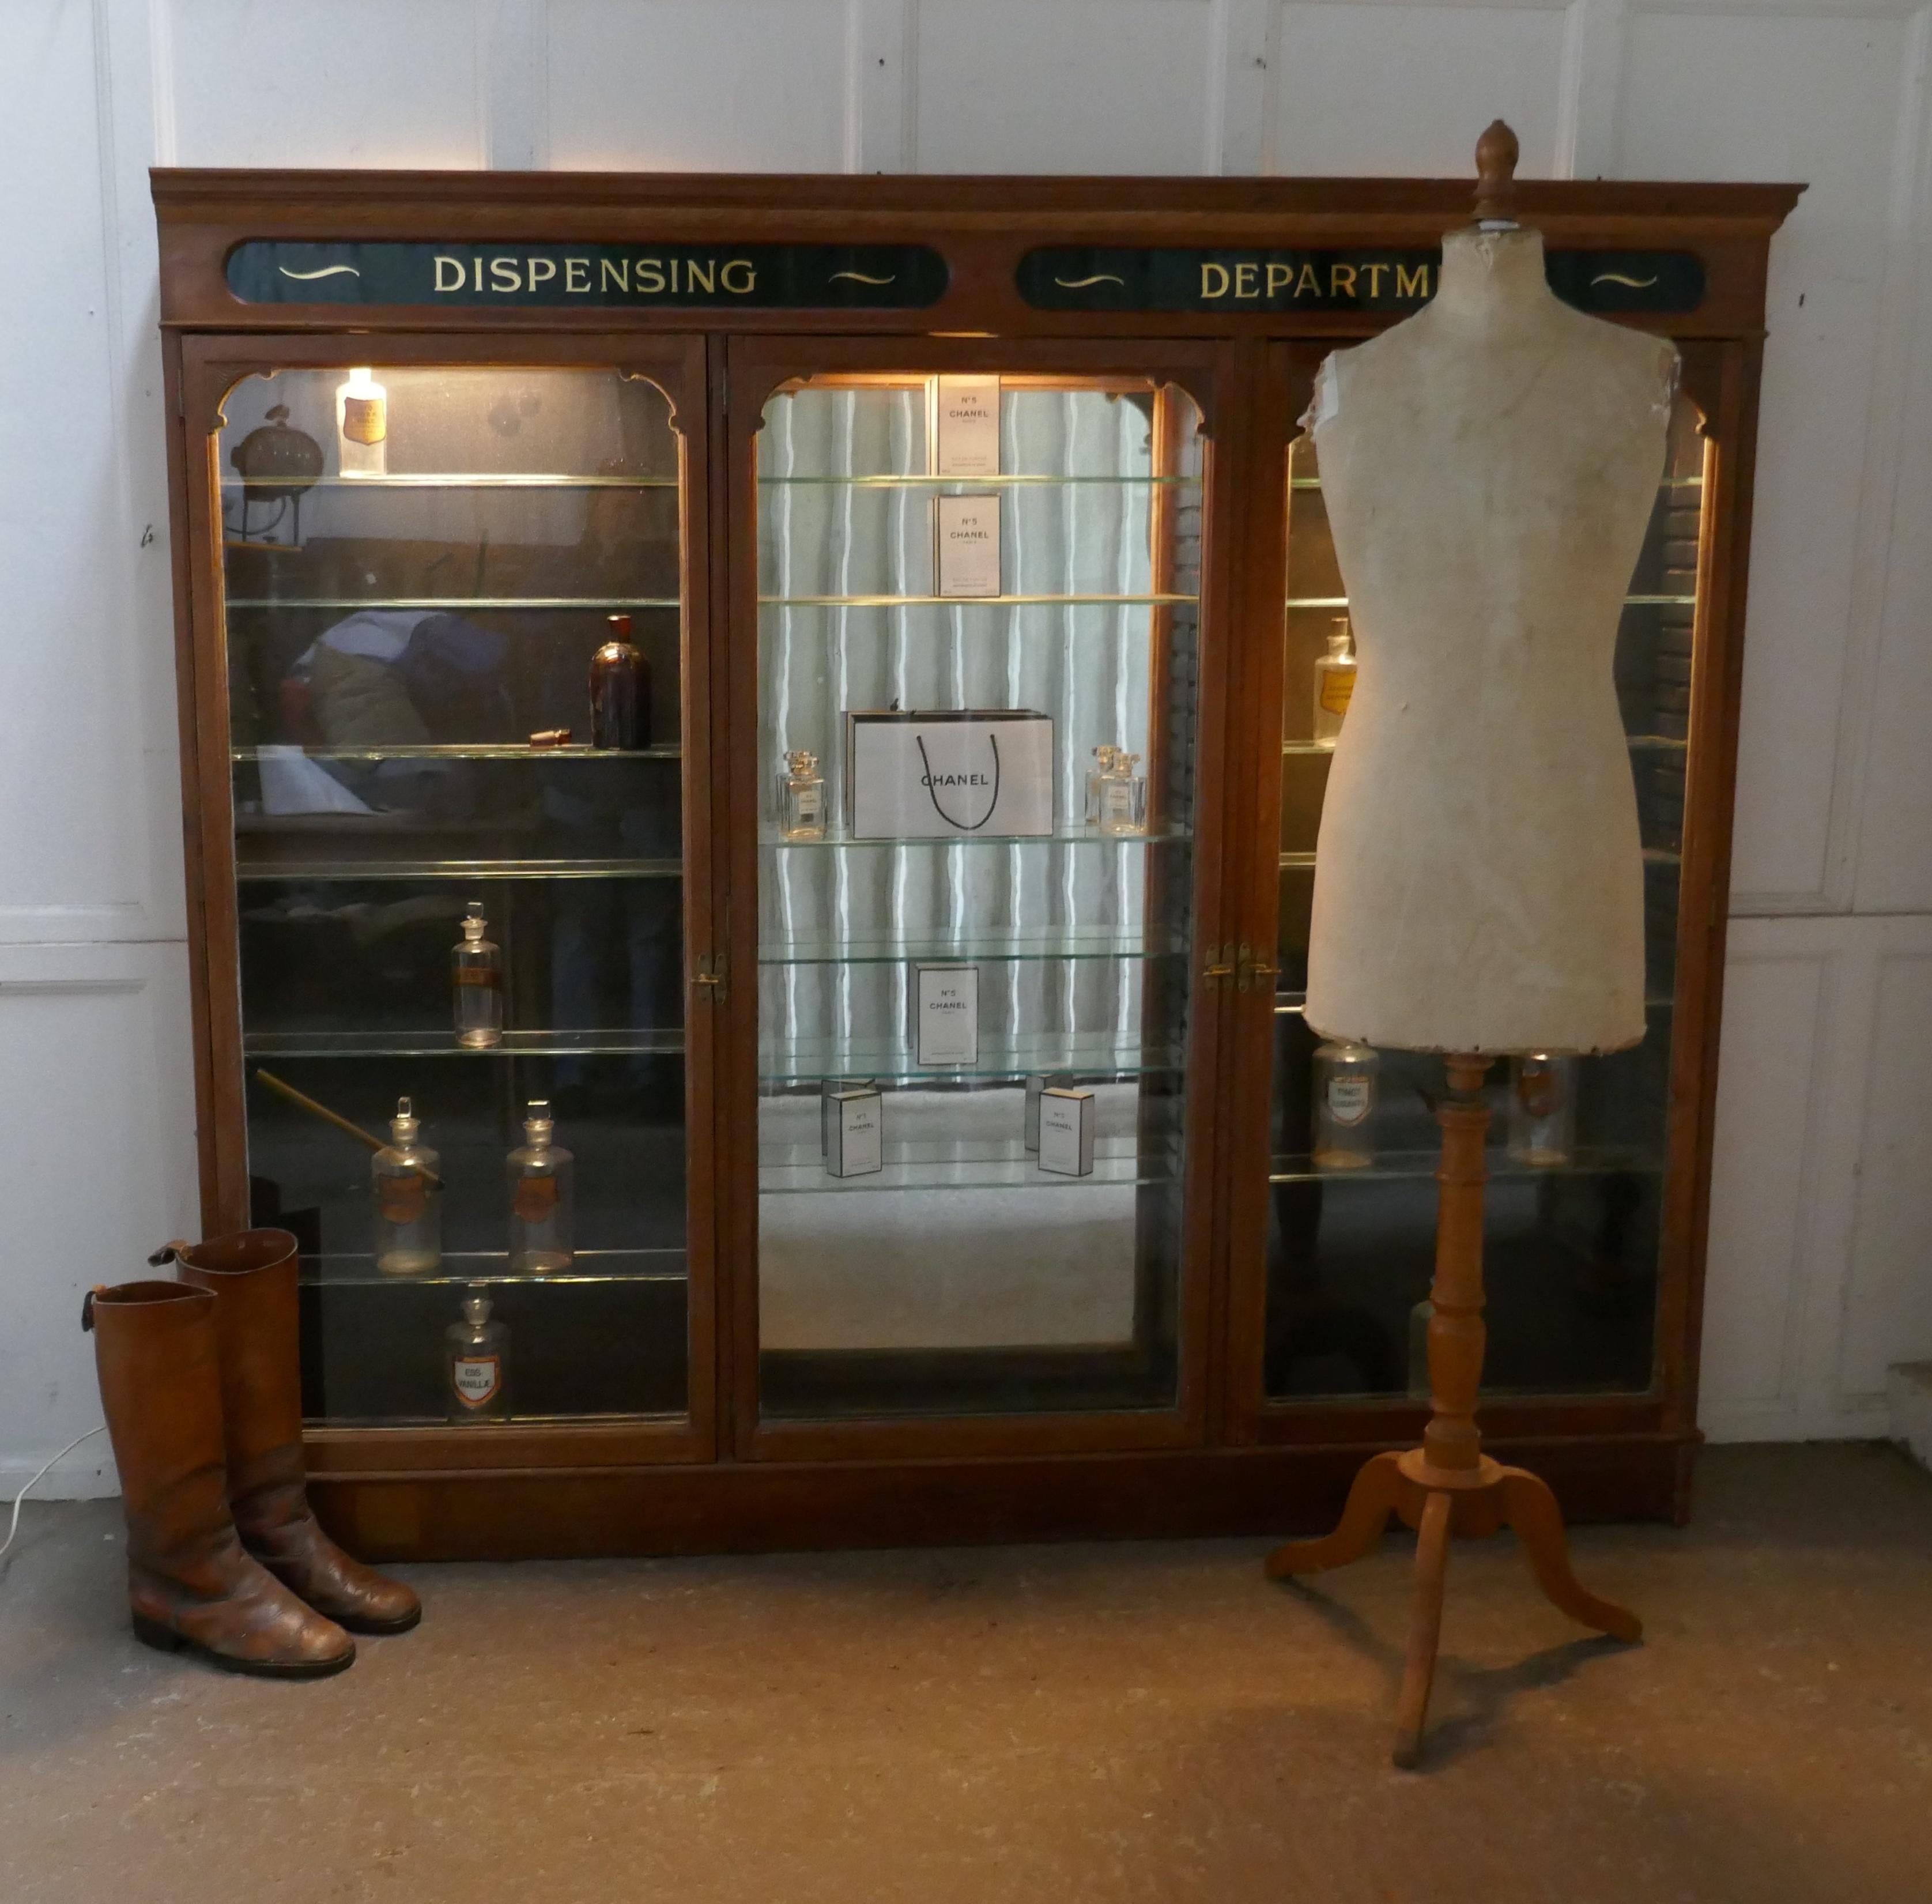 3 door Edwardian glazed mahogany chemists pharmacy cabinet

This is a superb piece for display, it has 3 individual cupboards in the one piece cabinet. The cupboard is shallow and each cupboard has has many removable glass shelves and the back of